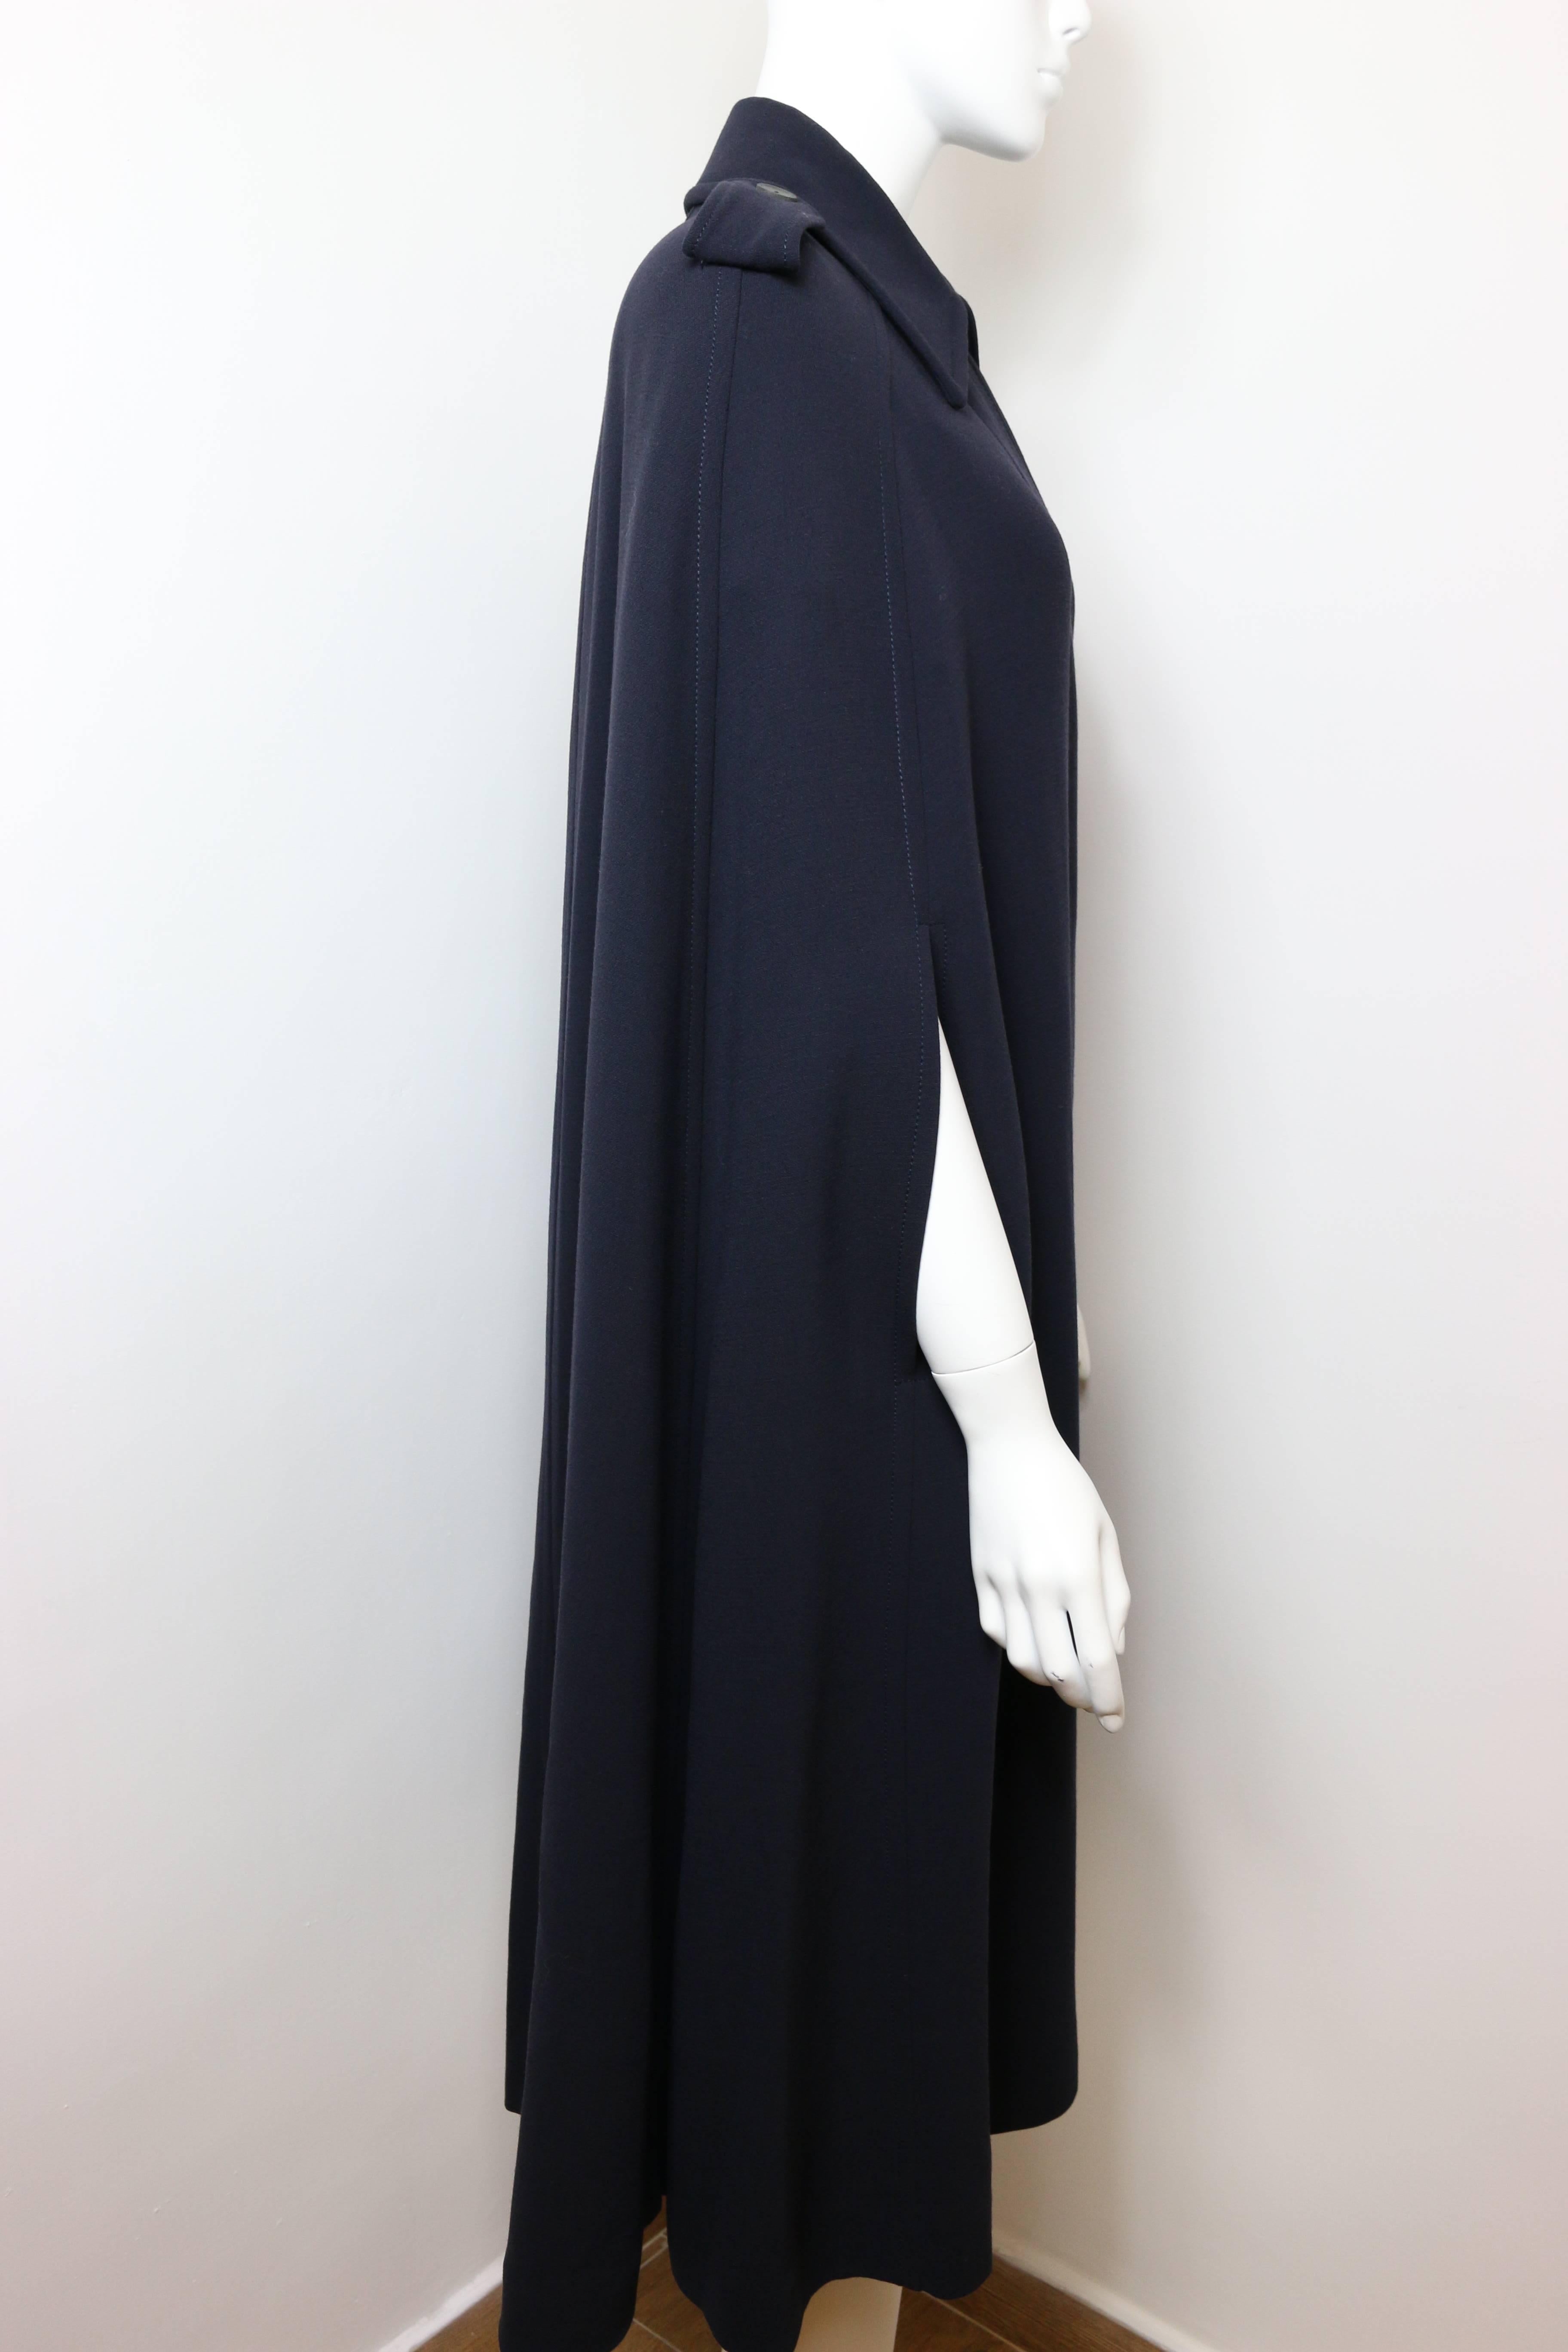 Gucci by Tom Ford Navy Wool Long Cape Coat For Sale 1